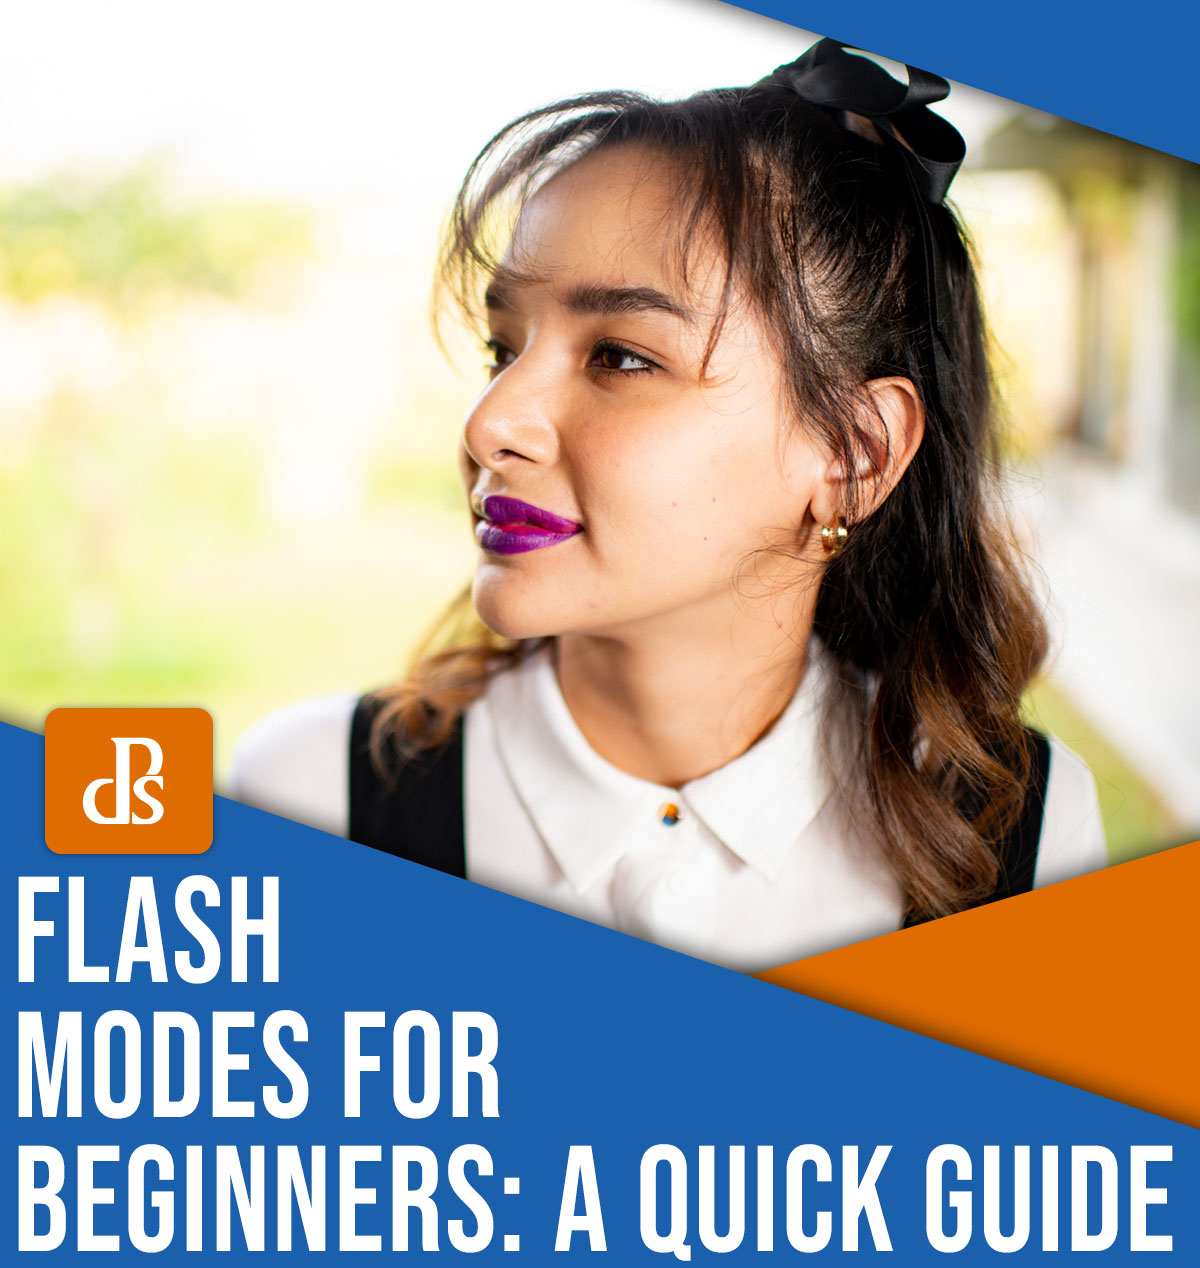 Flash modes for beginners